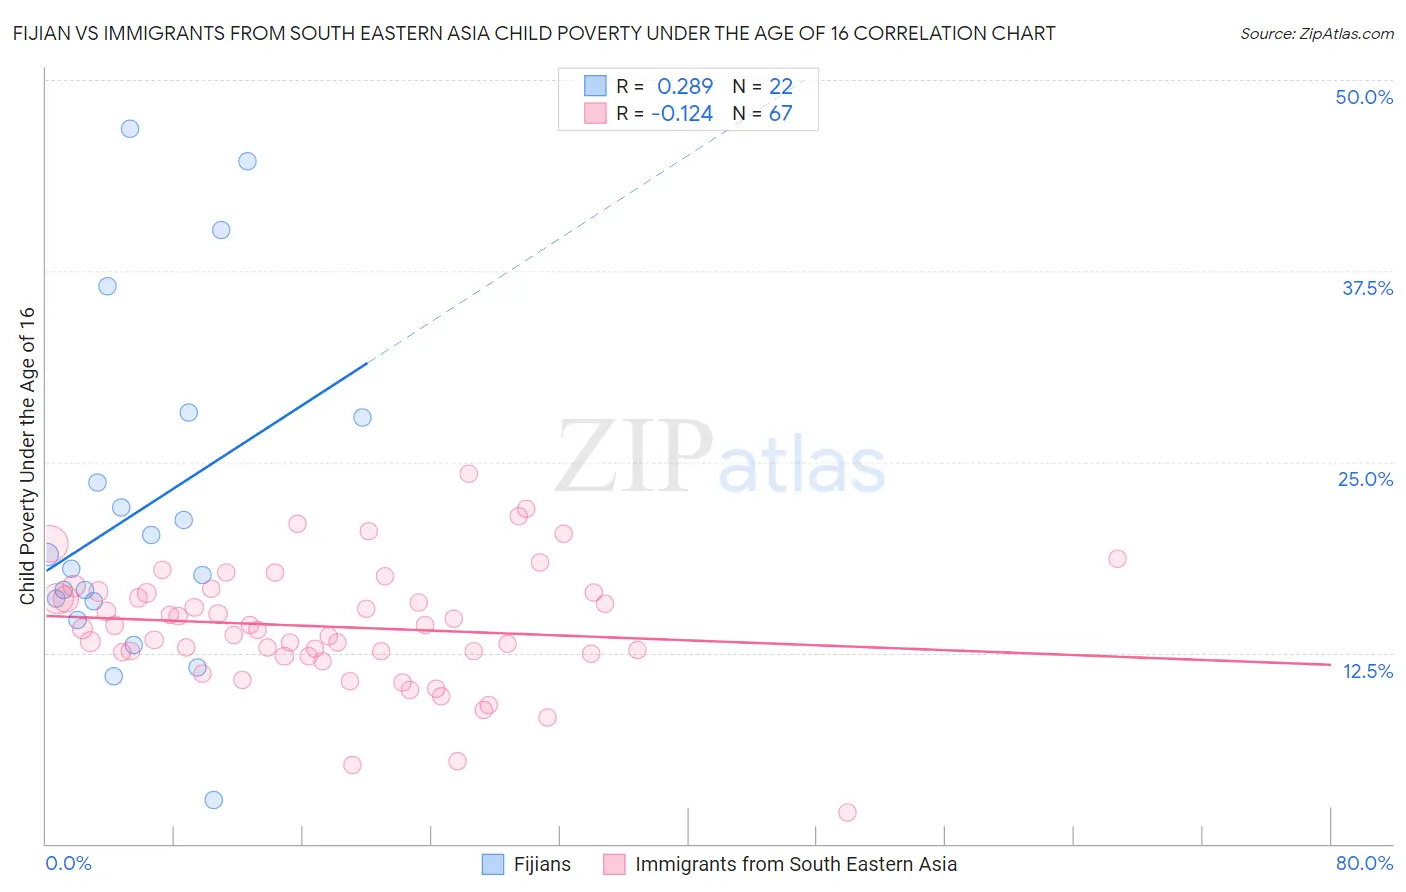 Fijian vs Immigrants from South Eastern Asia Child Poverty Under the Age of 16